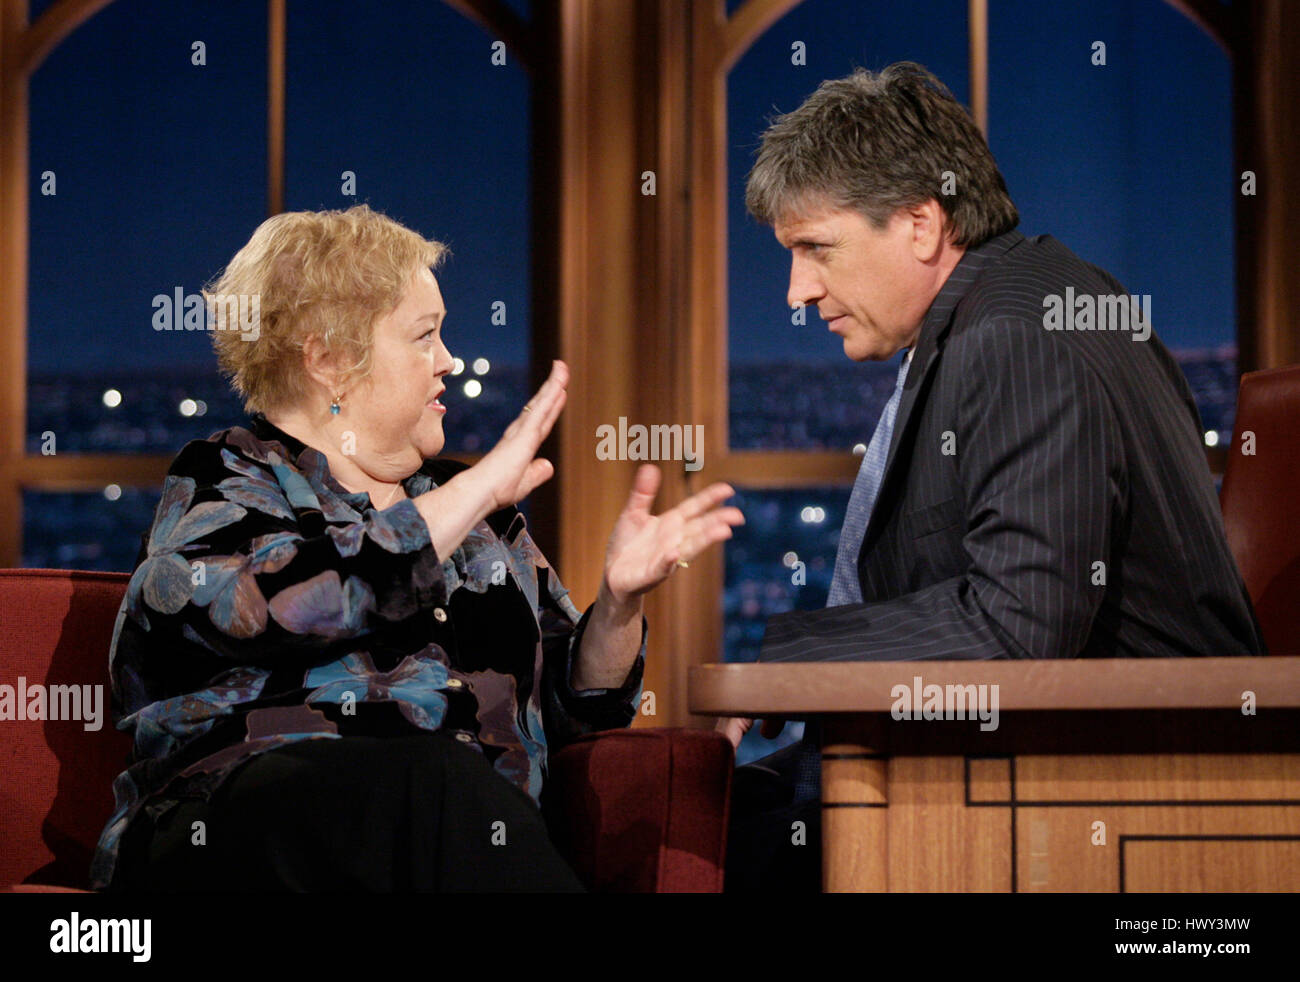 Actress Kathy Kinney, left, chats with host Craig Ferguson during a segment of 'The Late Late Show with Craig Ferguson' at CBS Television City in Los Angeles on Wednesday, Nov. 12, 2008. Photo by Francis Specker Stock Photo